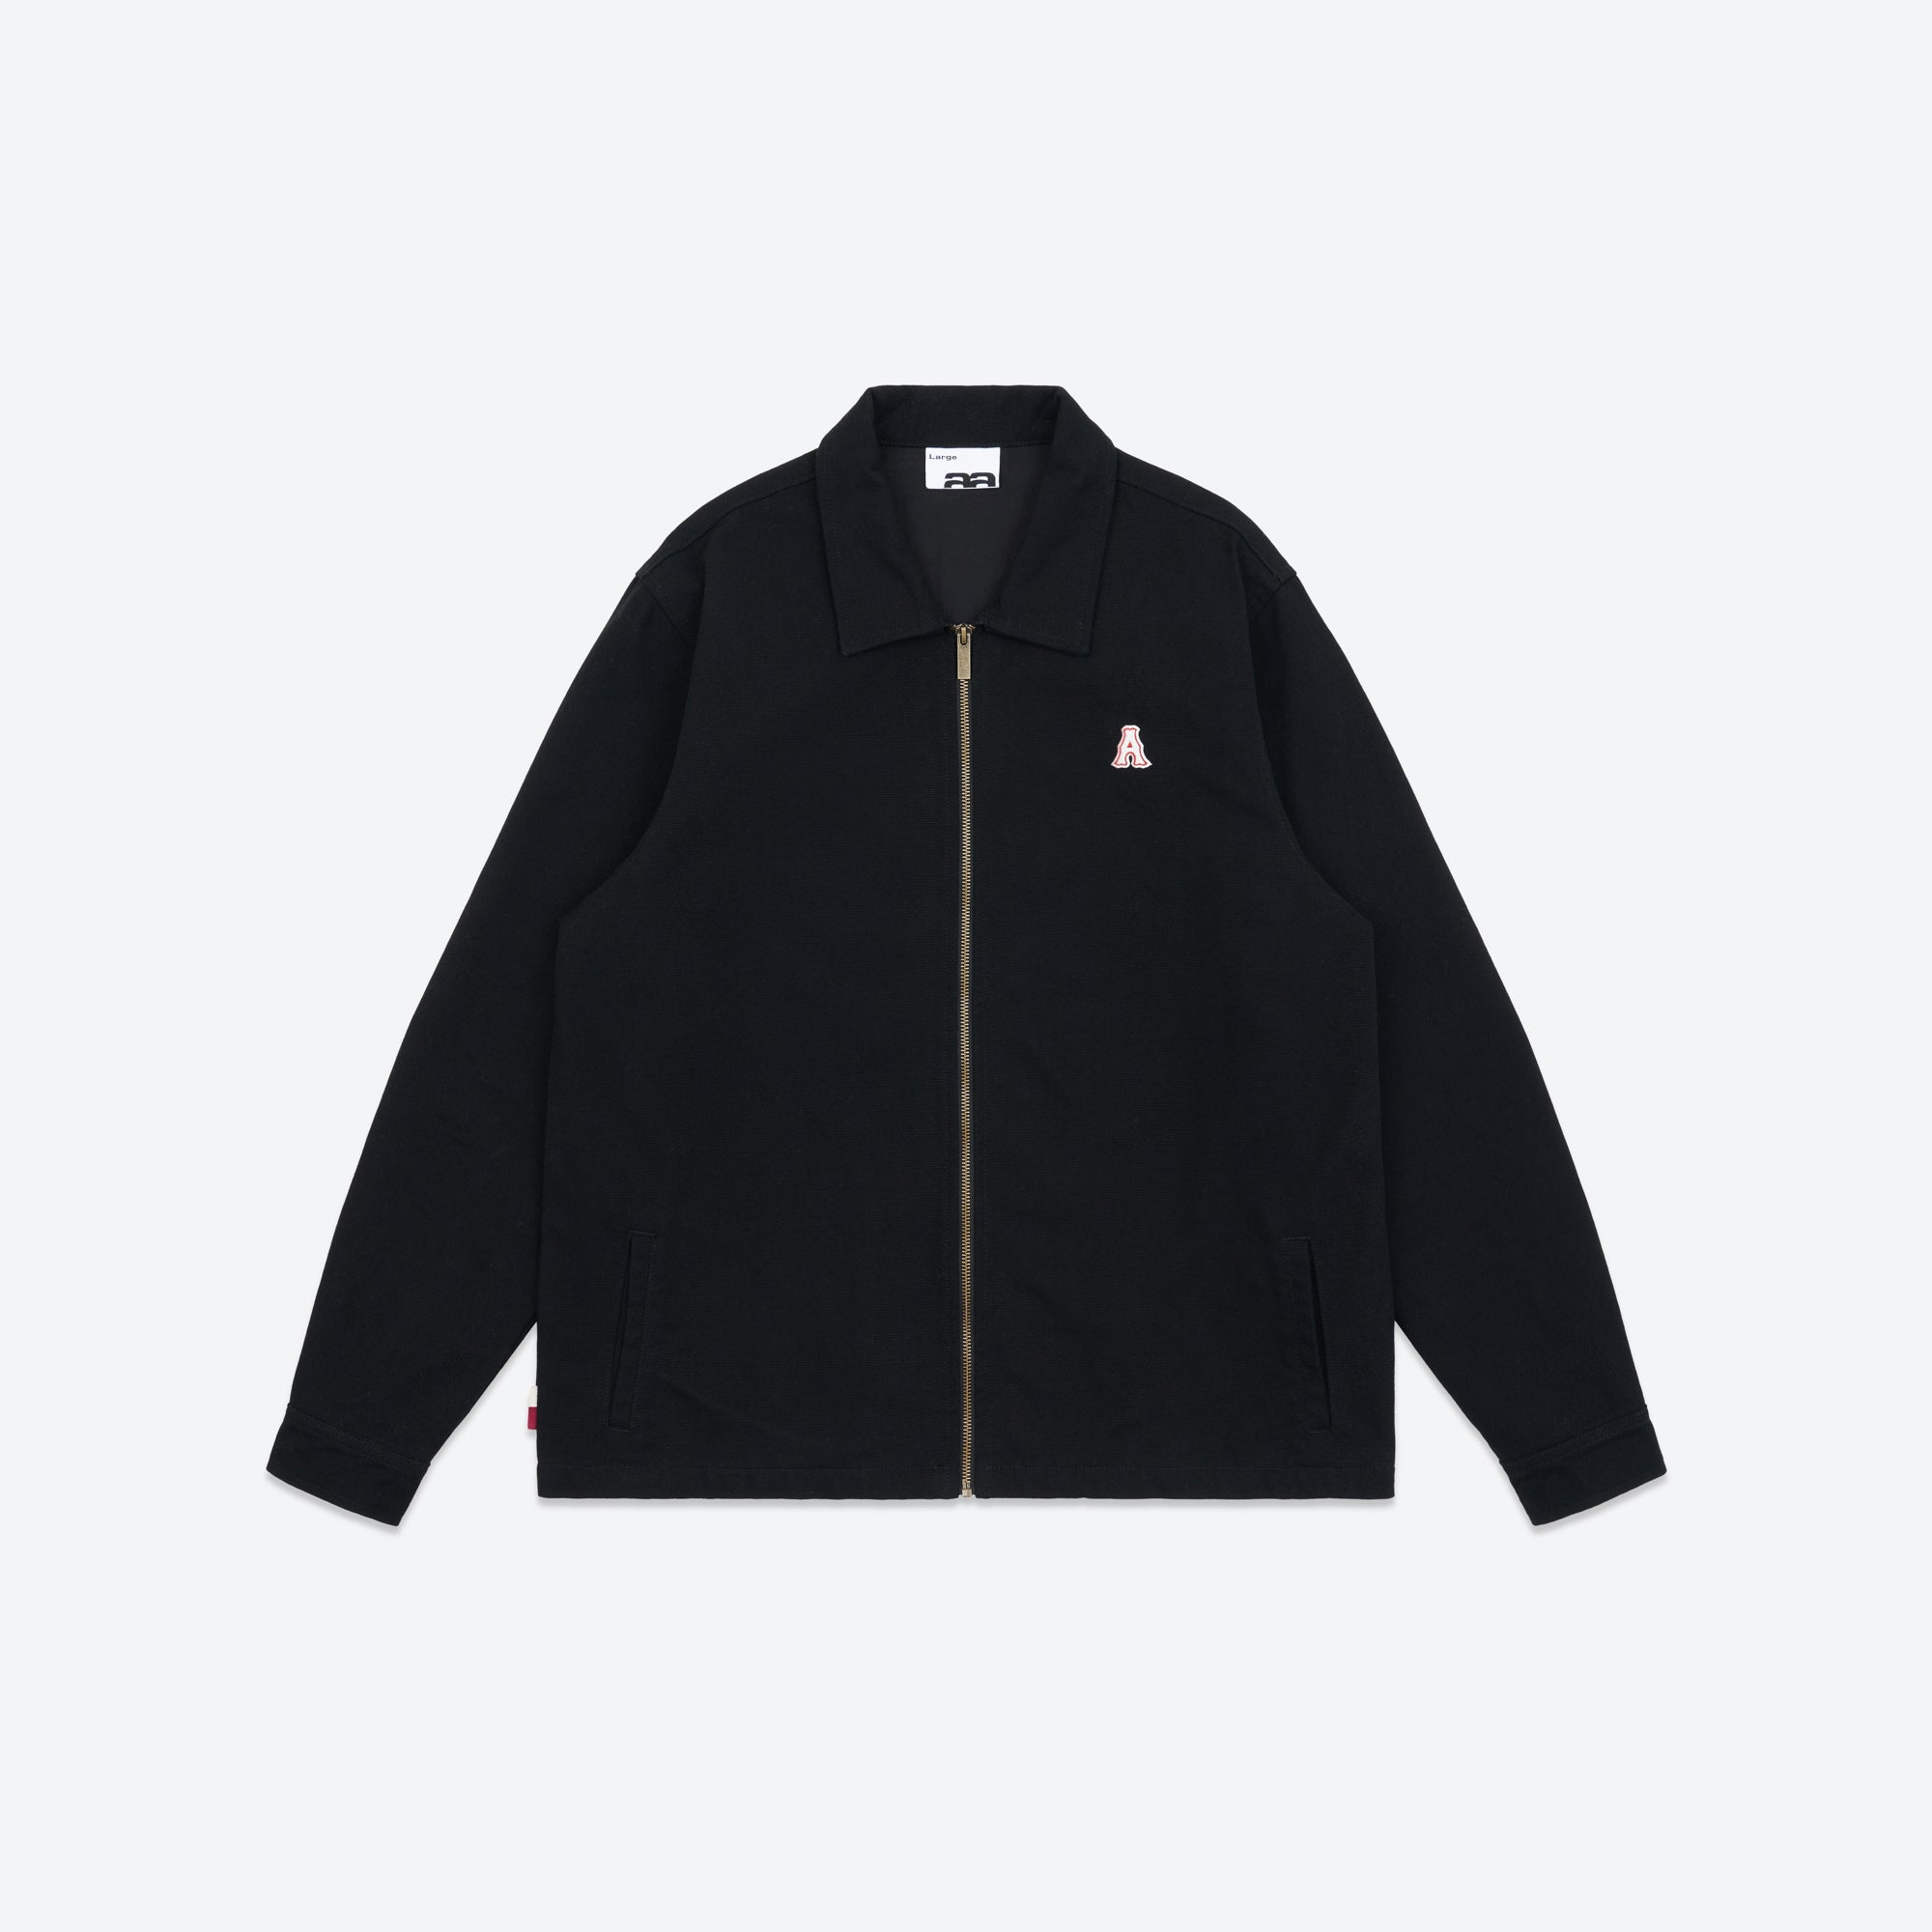 Alfred's Apartment - Trusted Jacket - Black